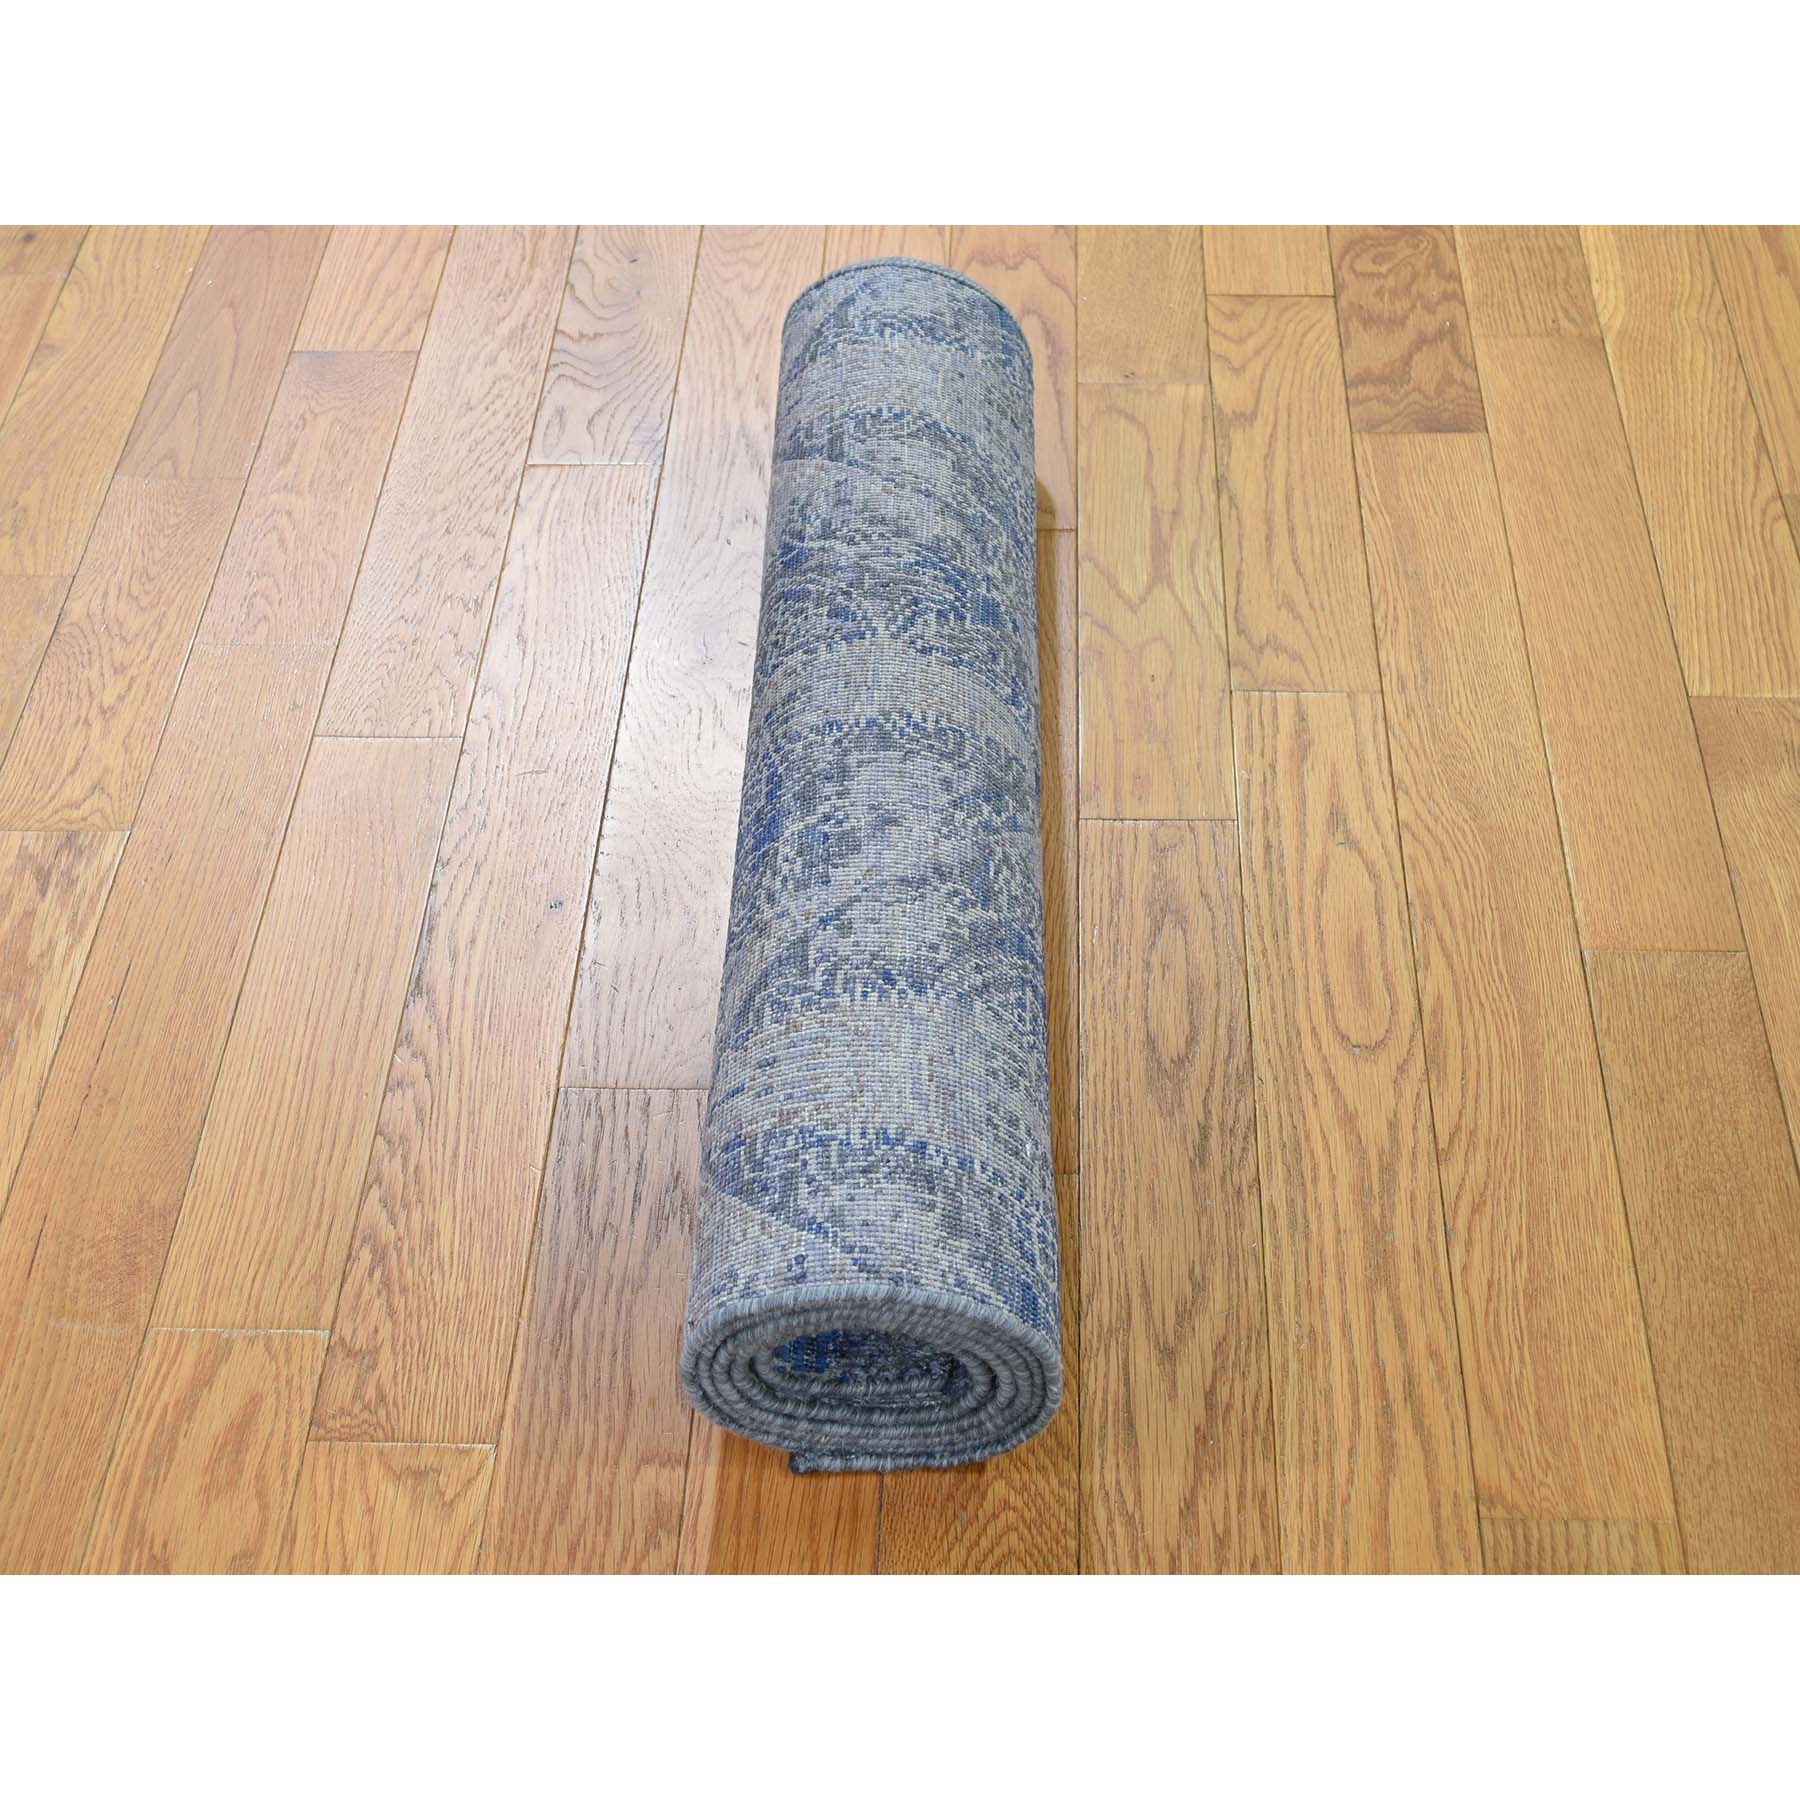 2-6 x6- Silk With Oxidized Wool Denim Blue Erased Rossette Design Hand-Knotted Oriental Rug 